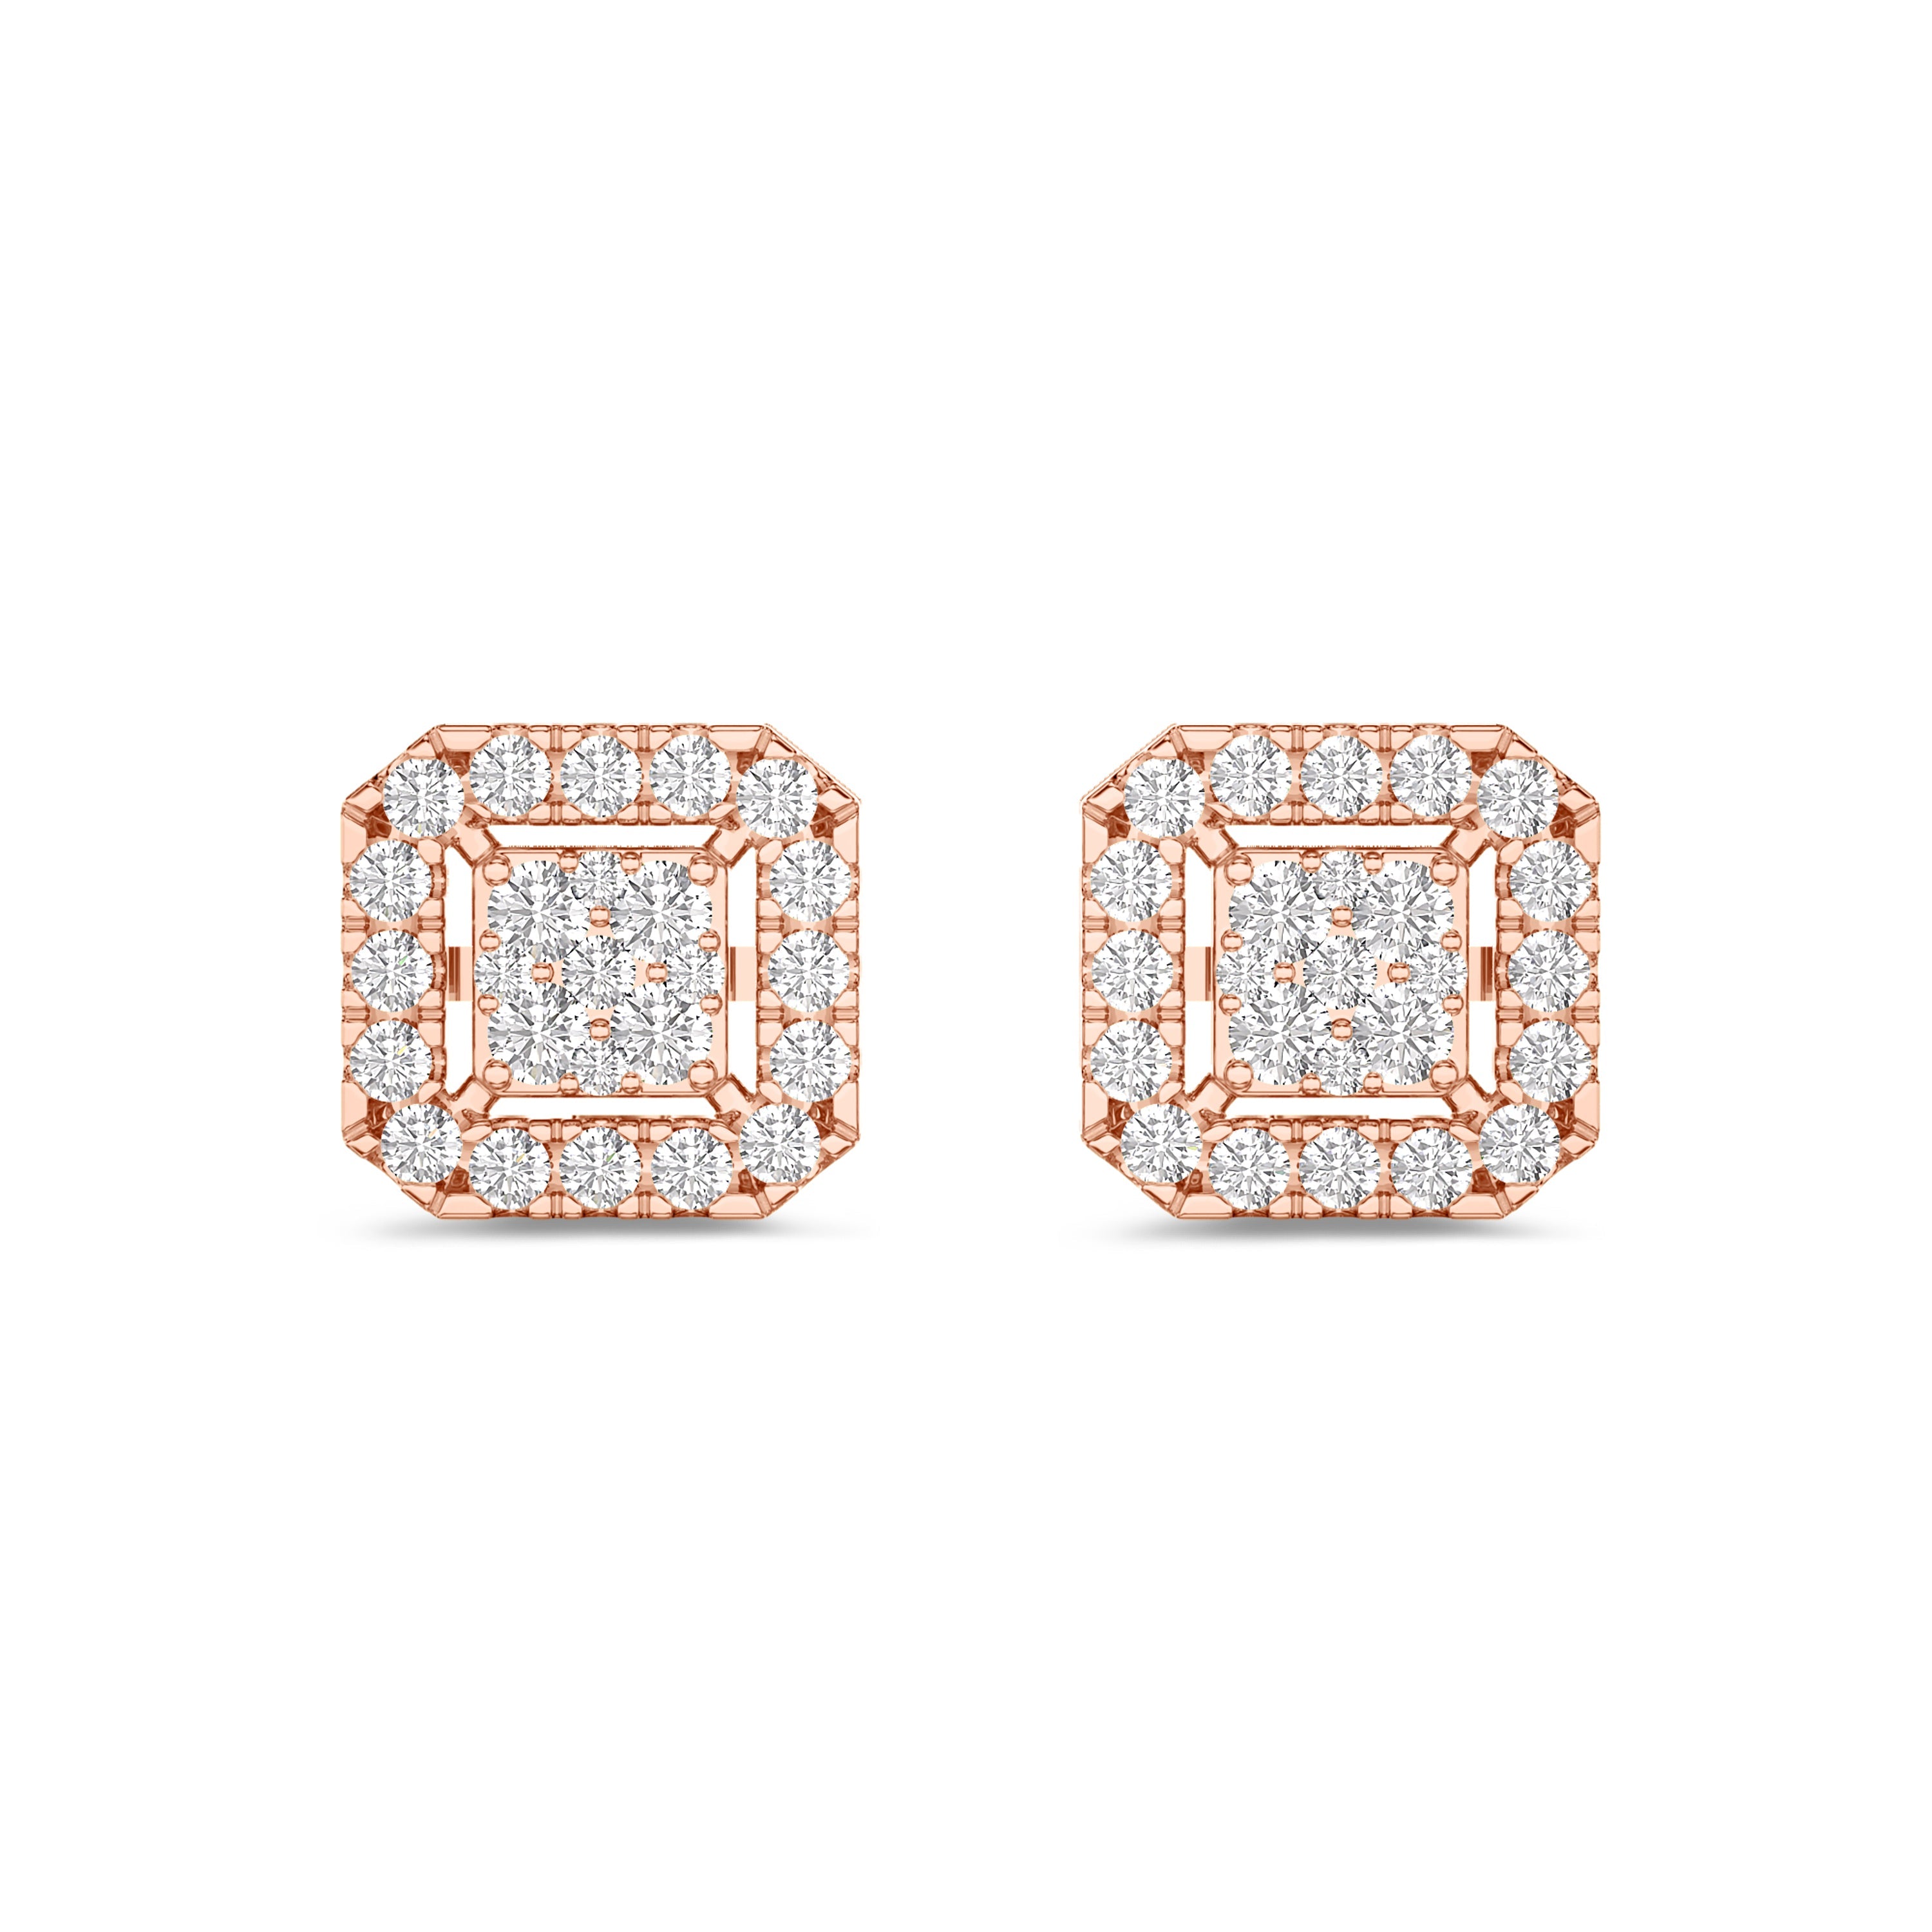 octagonal shaped cluster diamond earrings in 18k rose gold, FG color and SI clarity